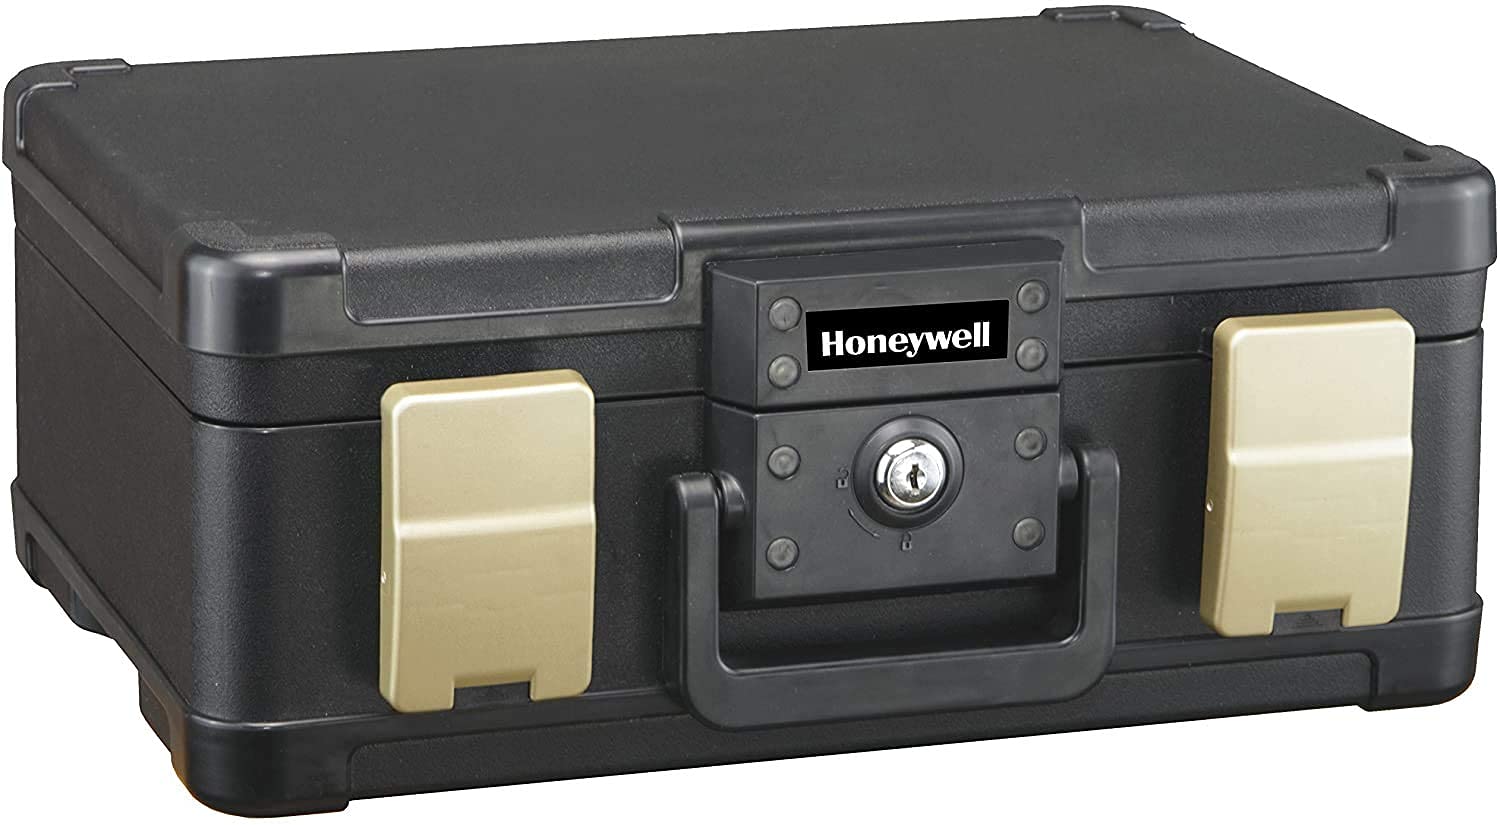 Honeywell Safes - 1103 Fire Safe & Waterproof Safe Box Chest with Carry Handle for Storing Documents in Home/Office/Safes - Medium (Black 0.27 cubic feet)